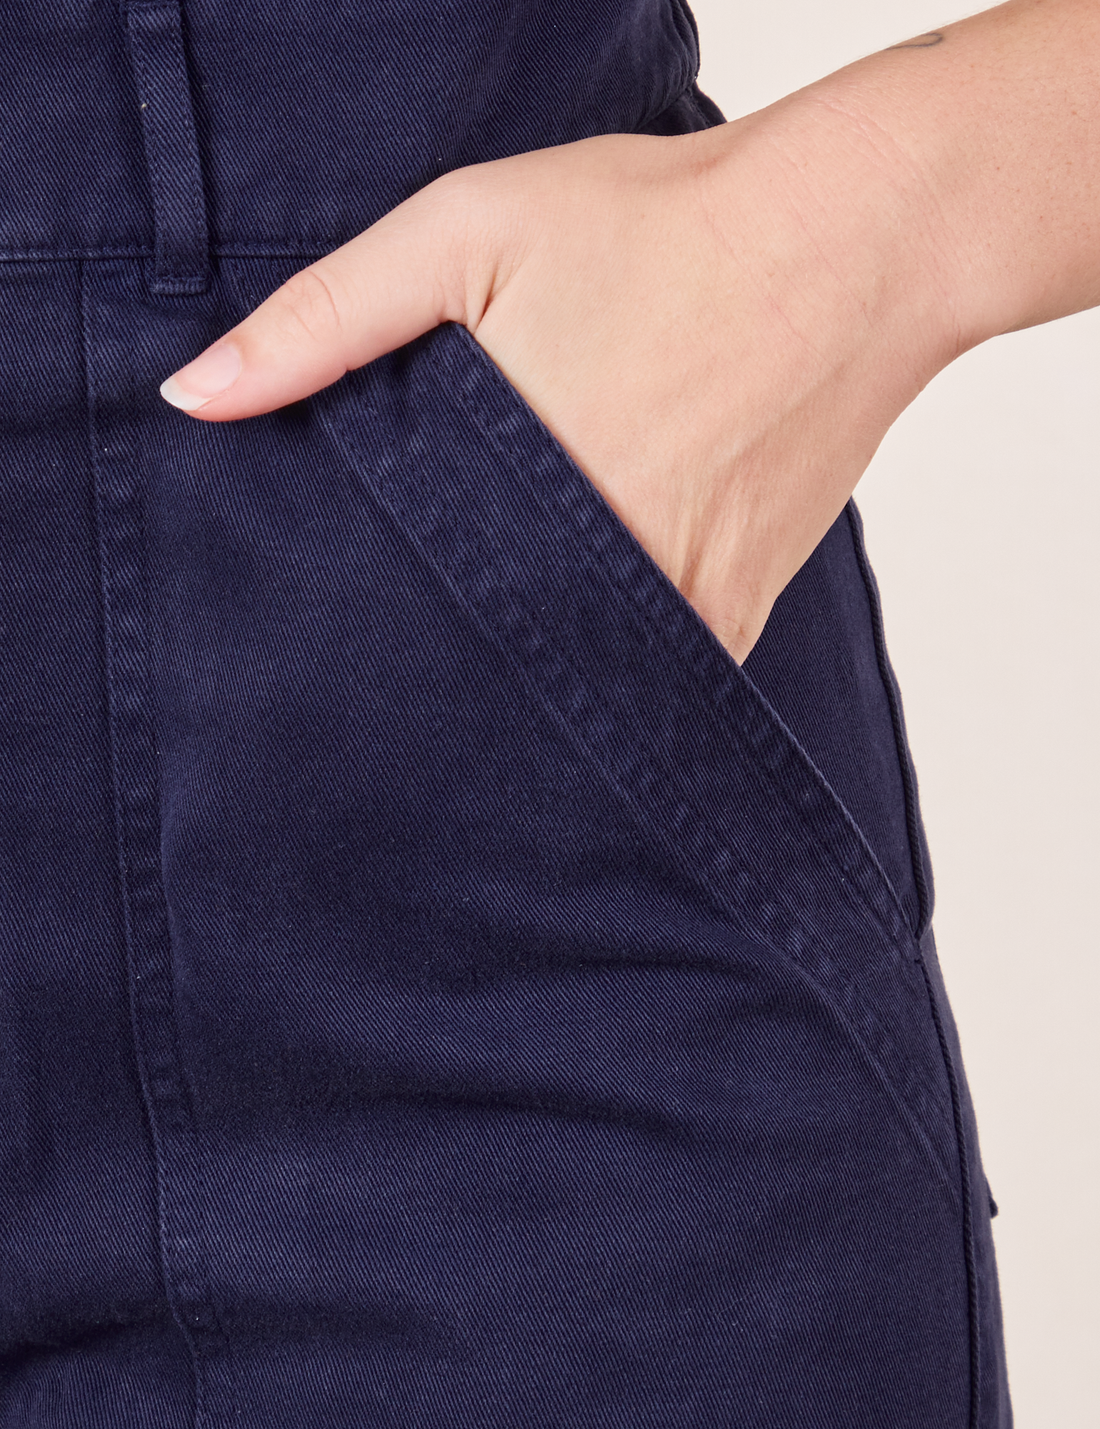 Short Sleeve Jumpsuit in Navy Blue hand in pant pocket on Alex